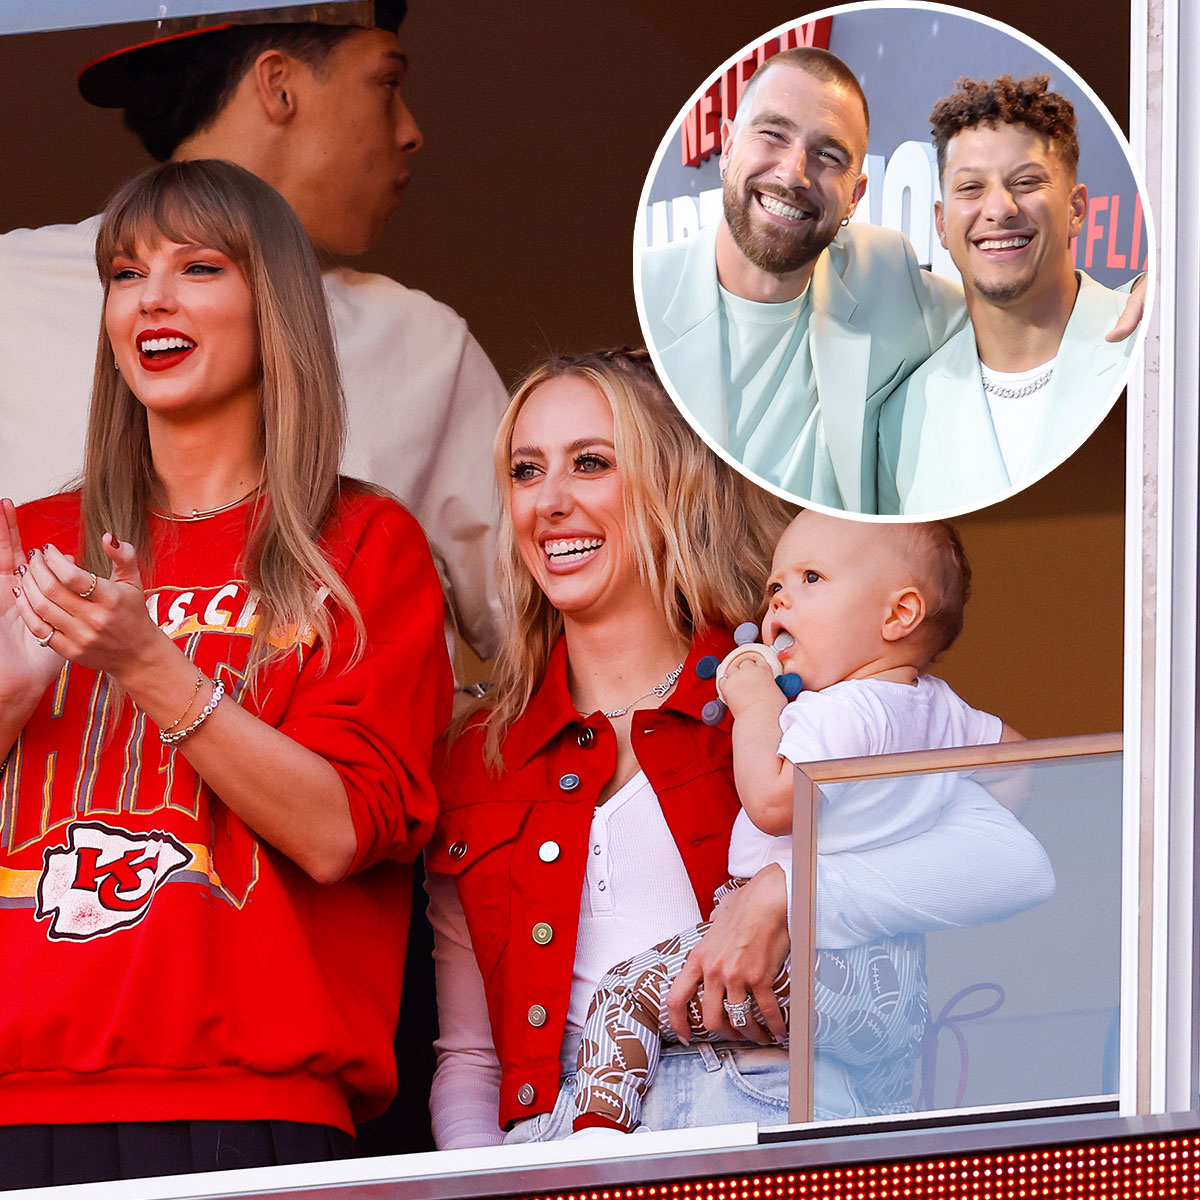 Patrick Mahomes Wants to “One Up” Brittany & Taylor Swift’s Handshake